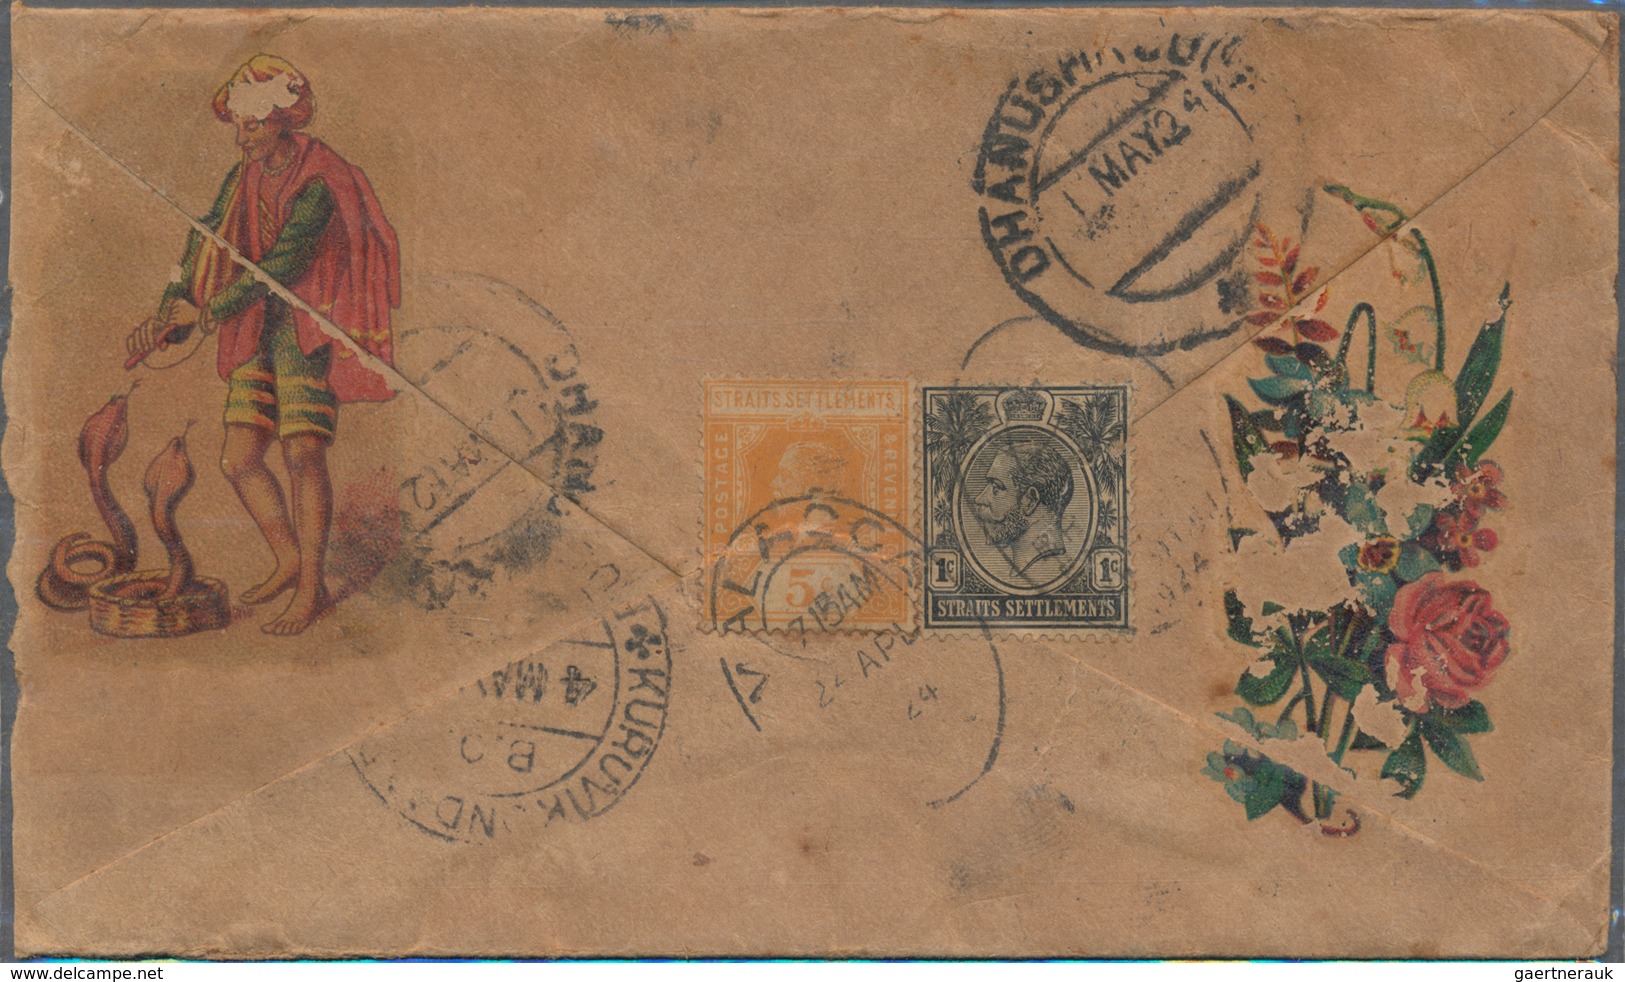 Malaiische Staaten: 1920's-1960's ADVERTISING: Collection of 37 illustrated envelopes with printings